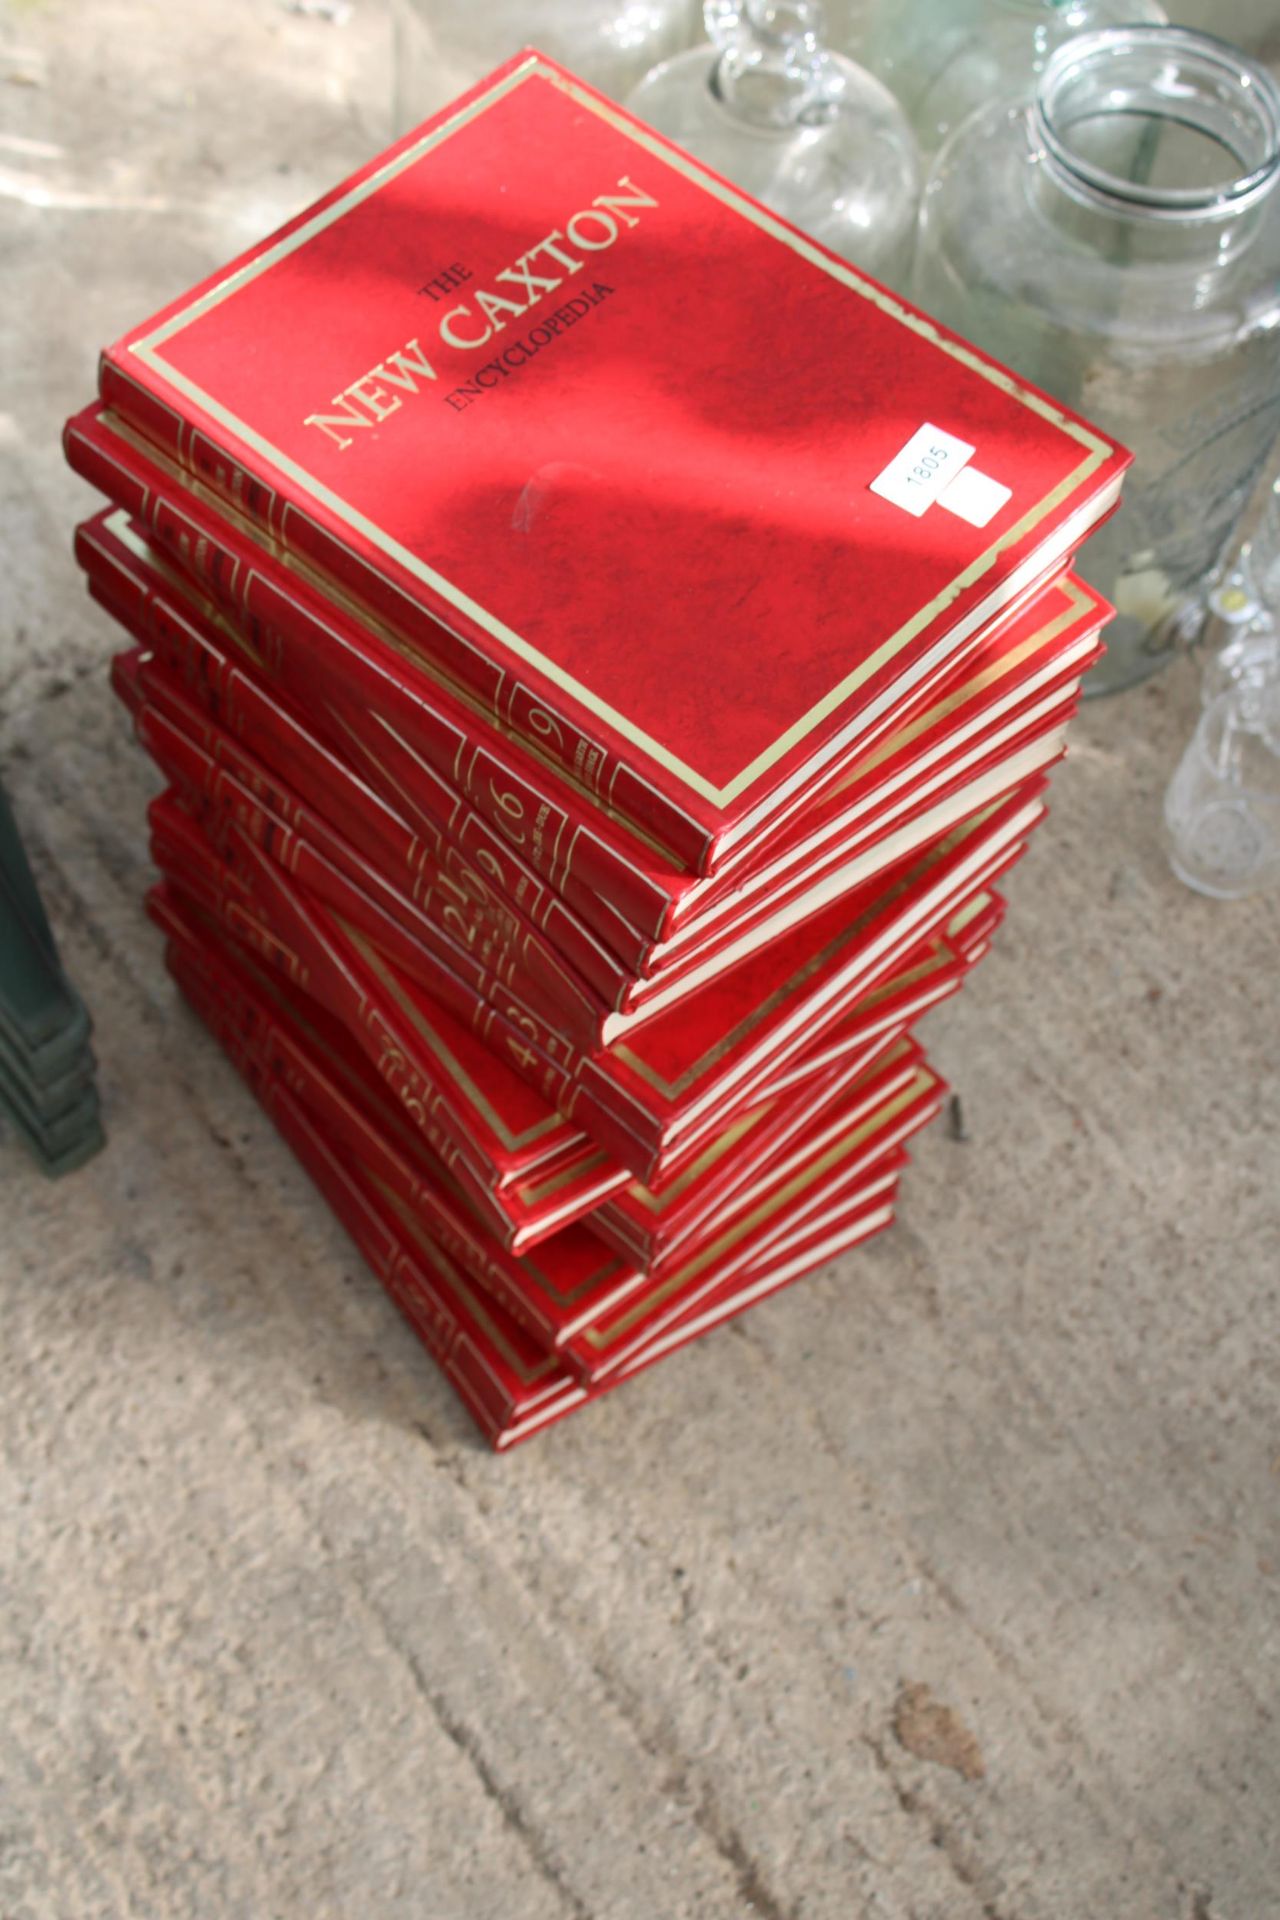 A LARGE COLLECTION OF 'THE NEW CAXTON' ENCYCLOPEDIAS